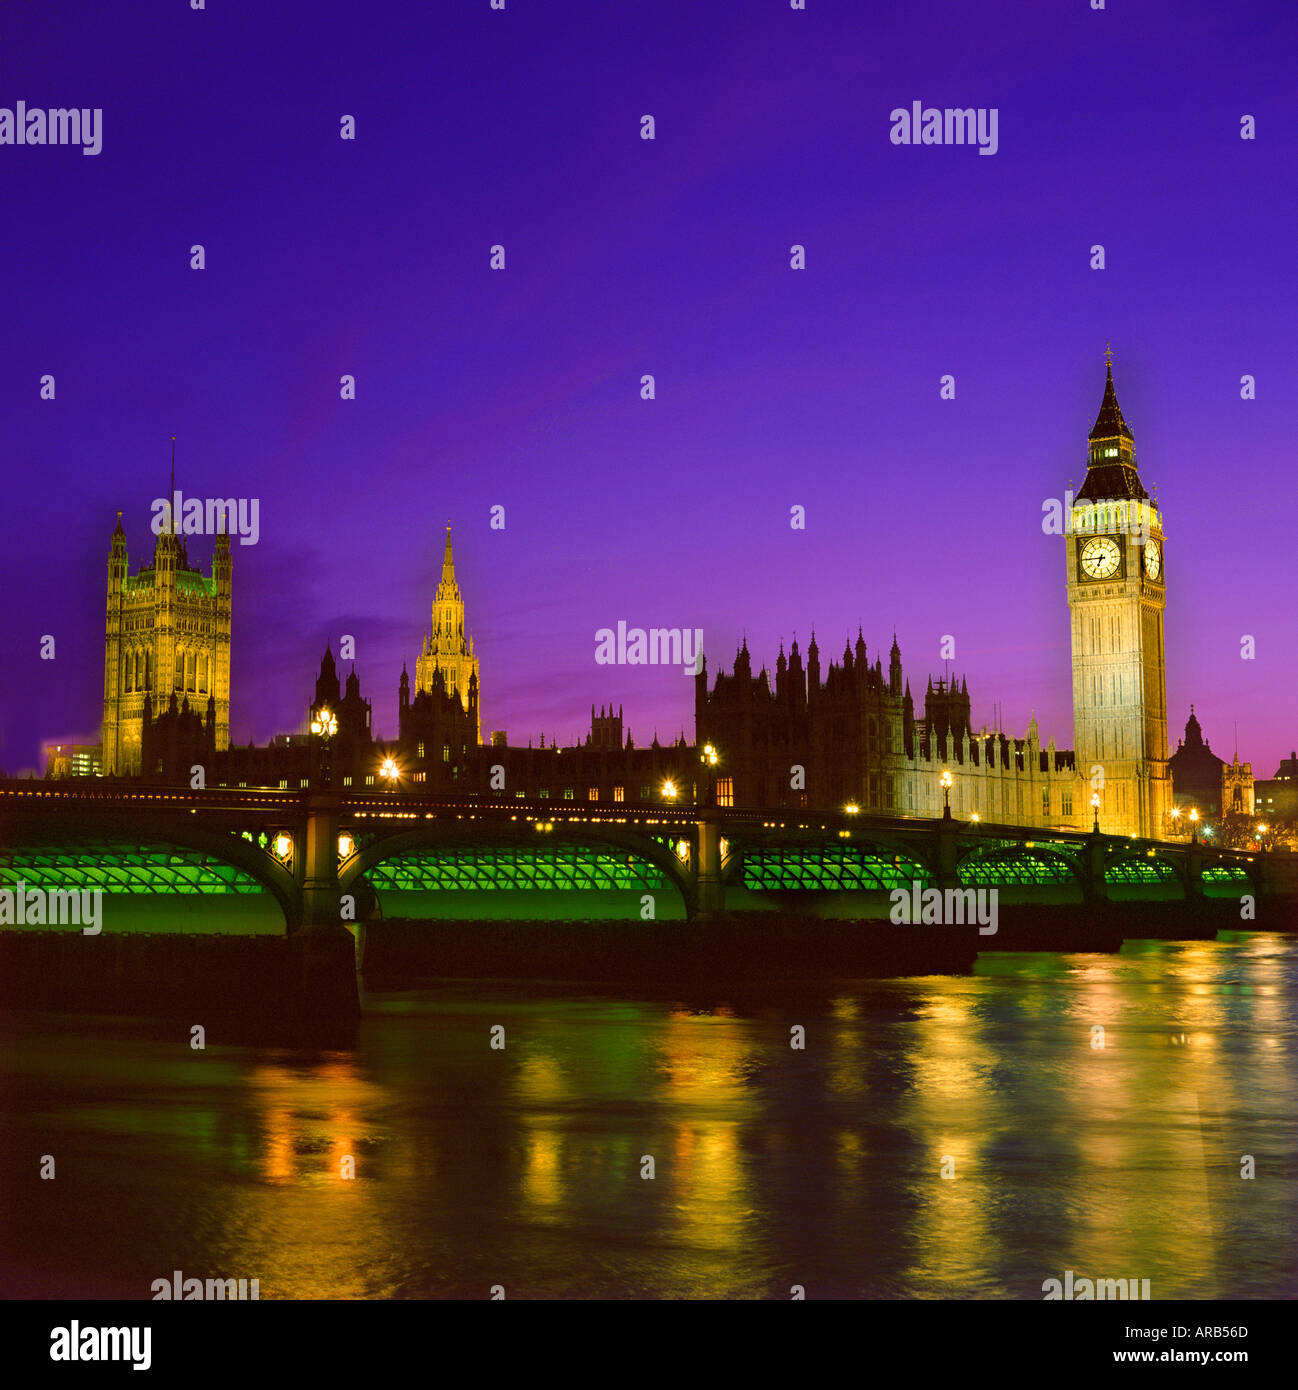 Scene of Houses of Parliament from across River Thames. Stock Photo